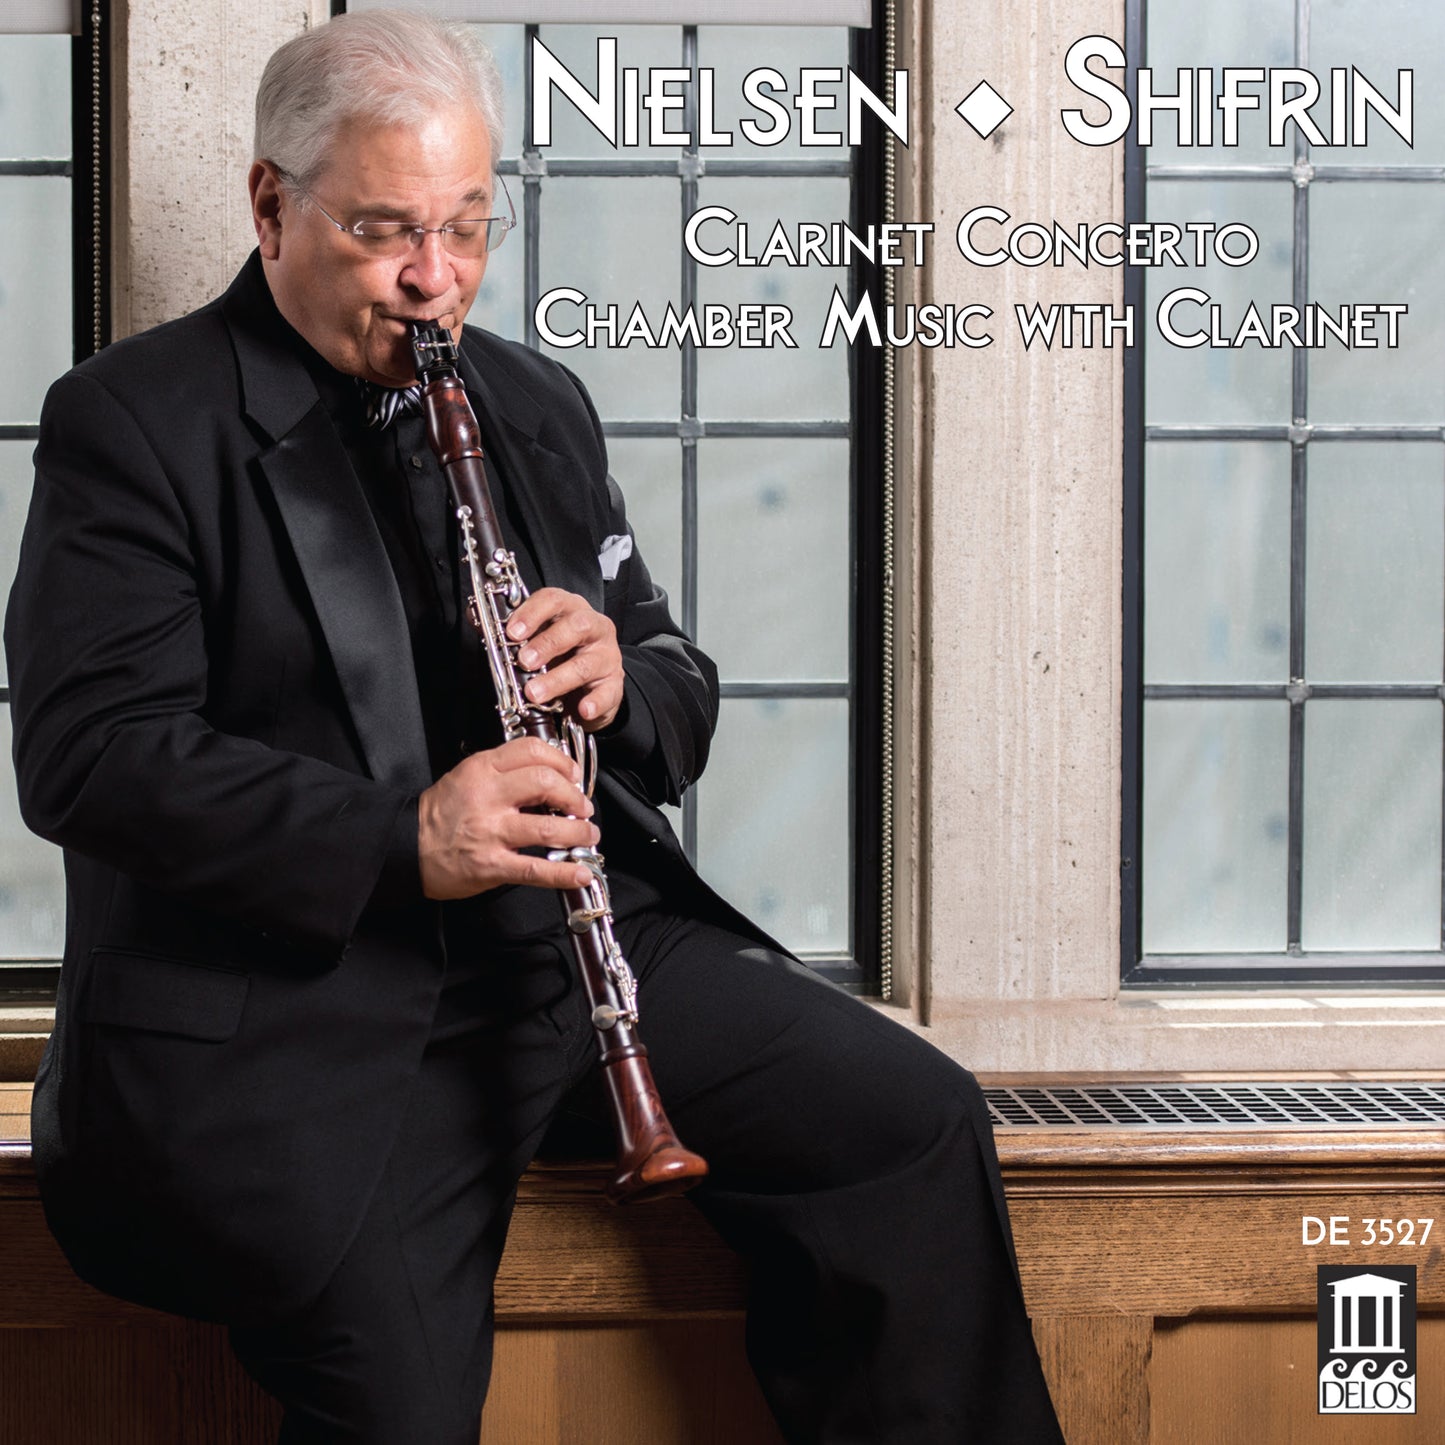 Nielsen: Clarinet Concerto & Chamber Music With Clarinet